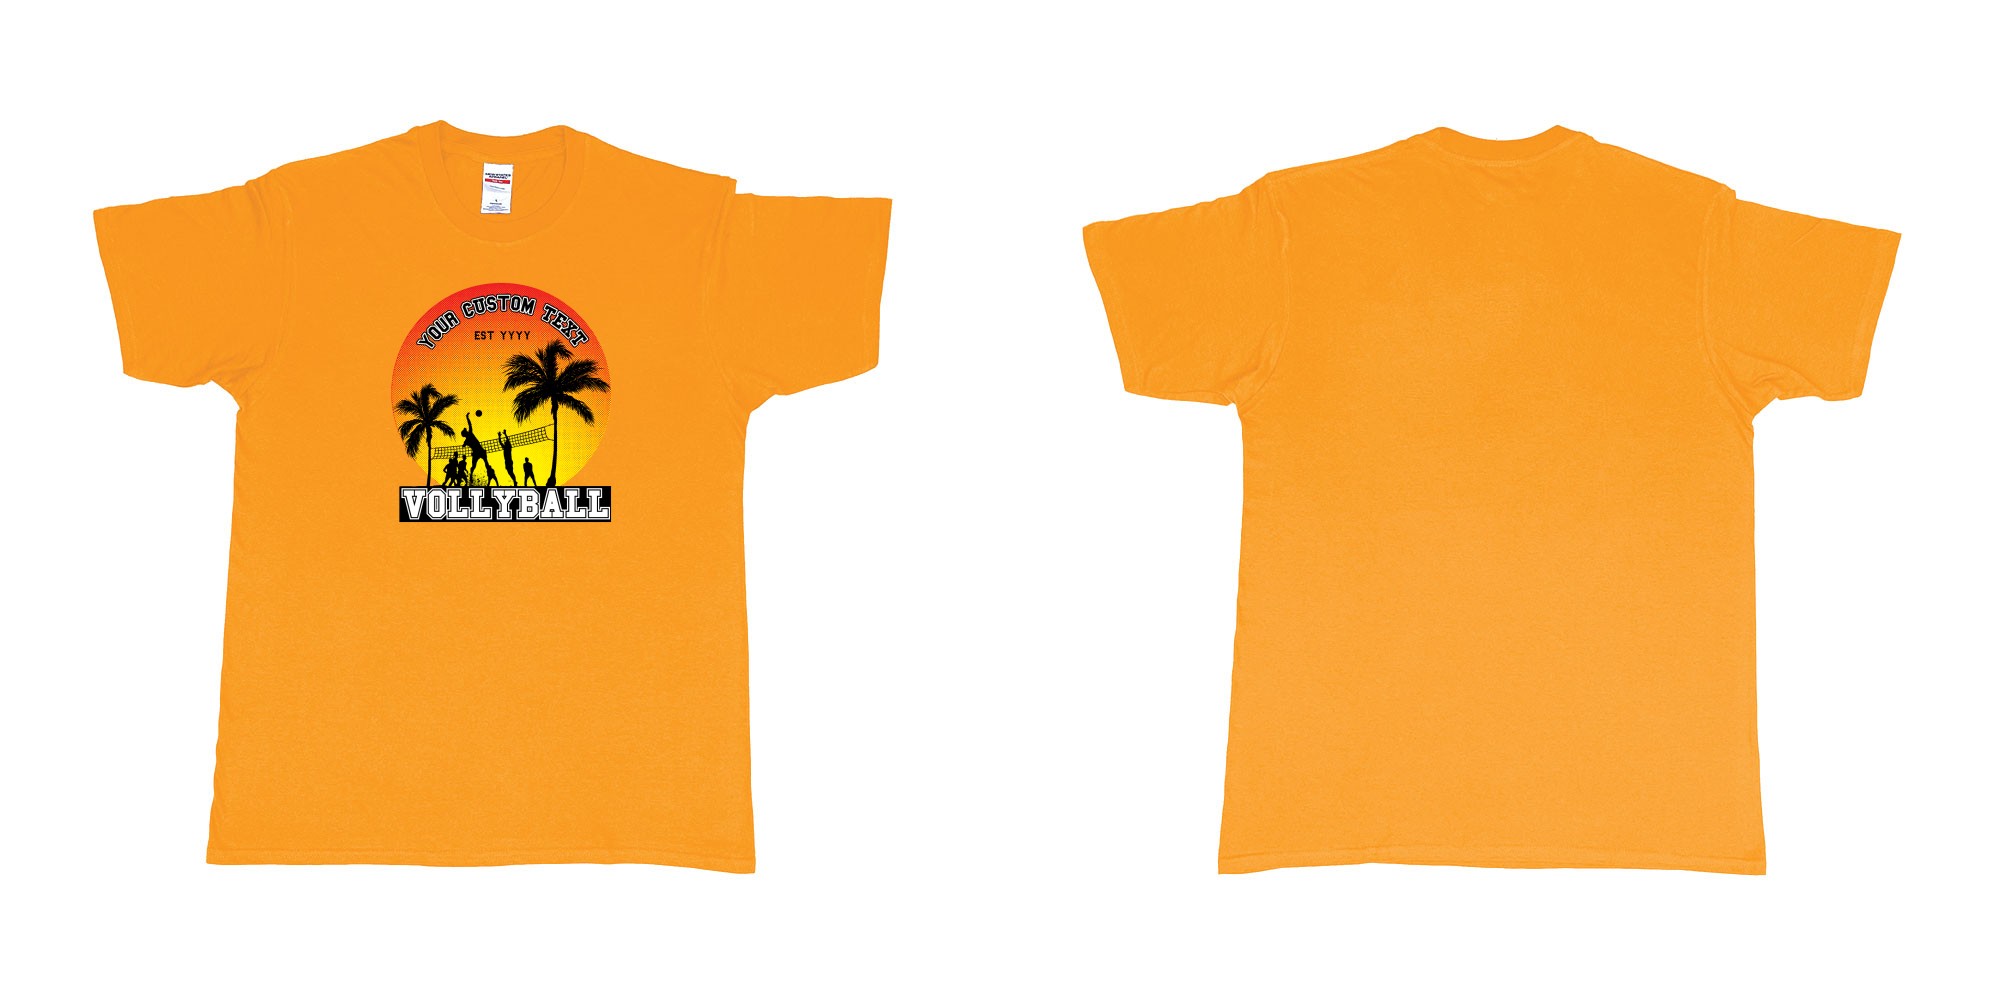 Custom tshirt design sunset volleyball t shirt with a sunset view and your custom print text and year in fabric color gold choice your own text made in Bali by The Pirate Way